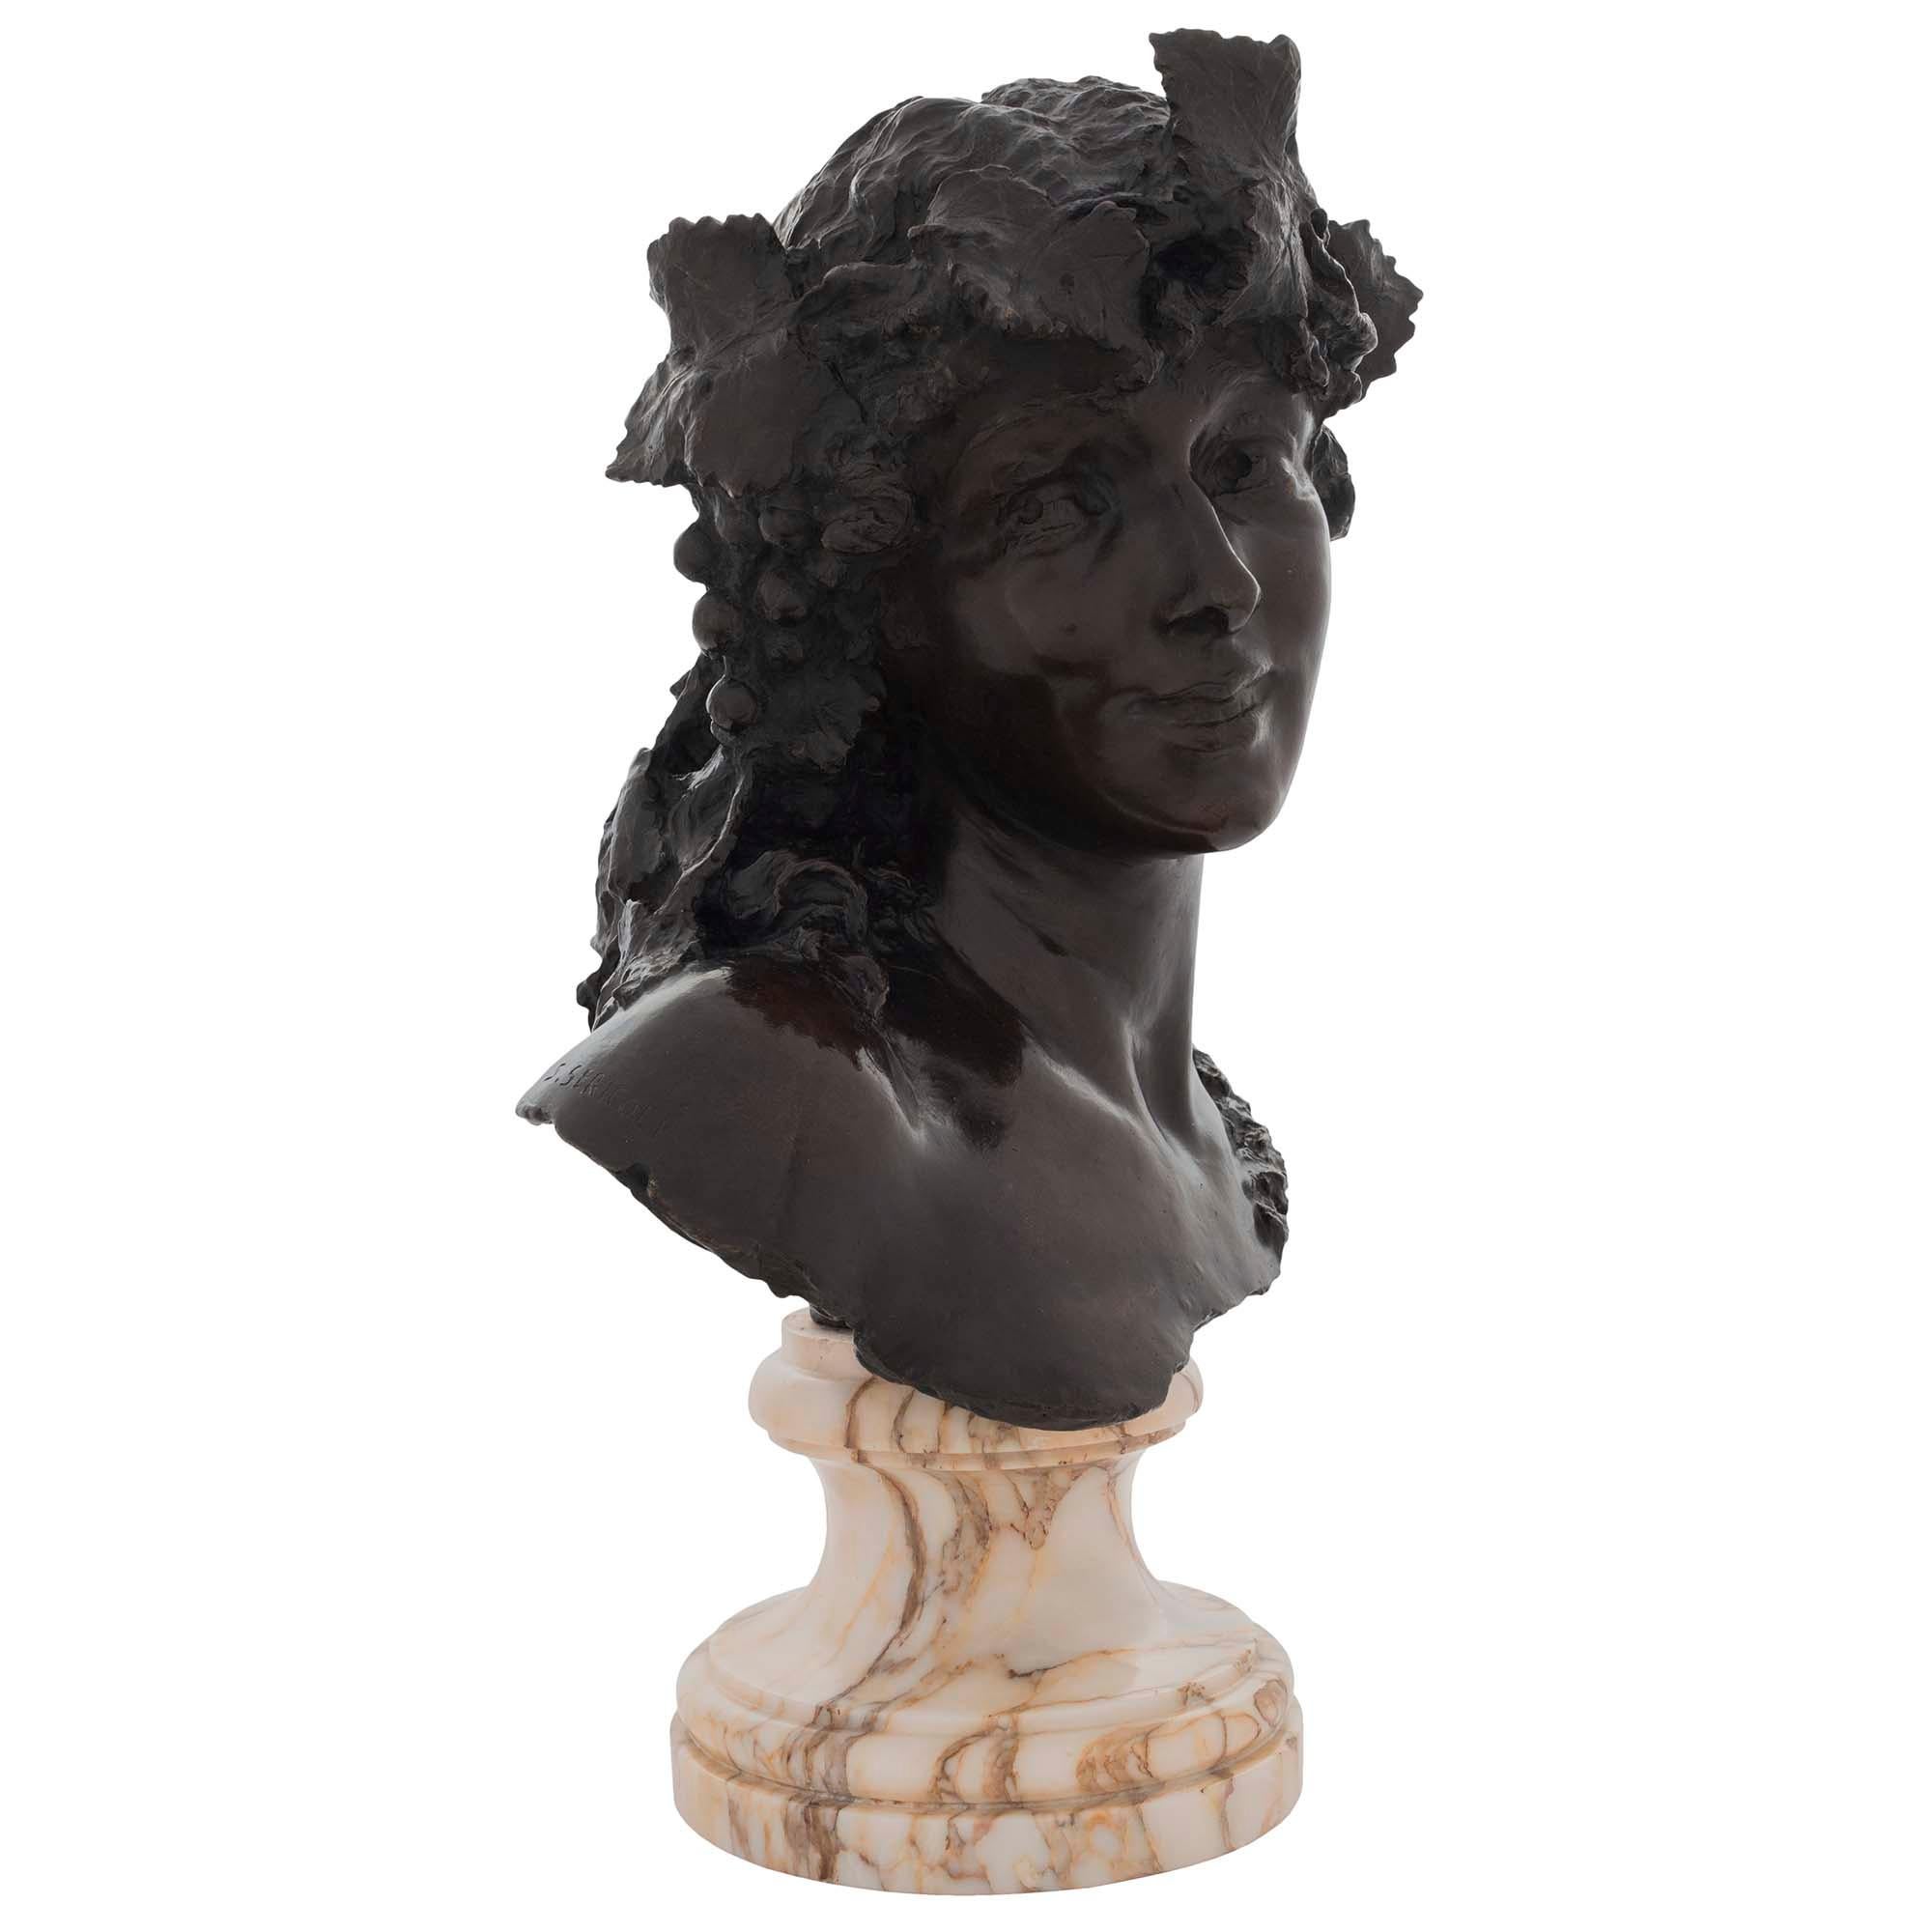 An elegant Italian 19th century patinated bronze of a young woman, signed by Silvio Sbricoli. The bust is raised by a circular mottled Pink Lez Breccia marble socle. The lady gazes towards the left with a wonderful facial expression and a grape